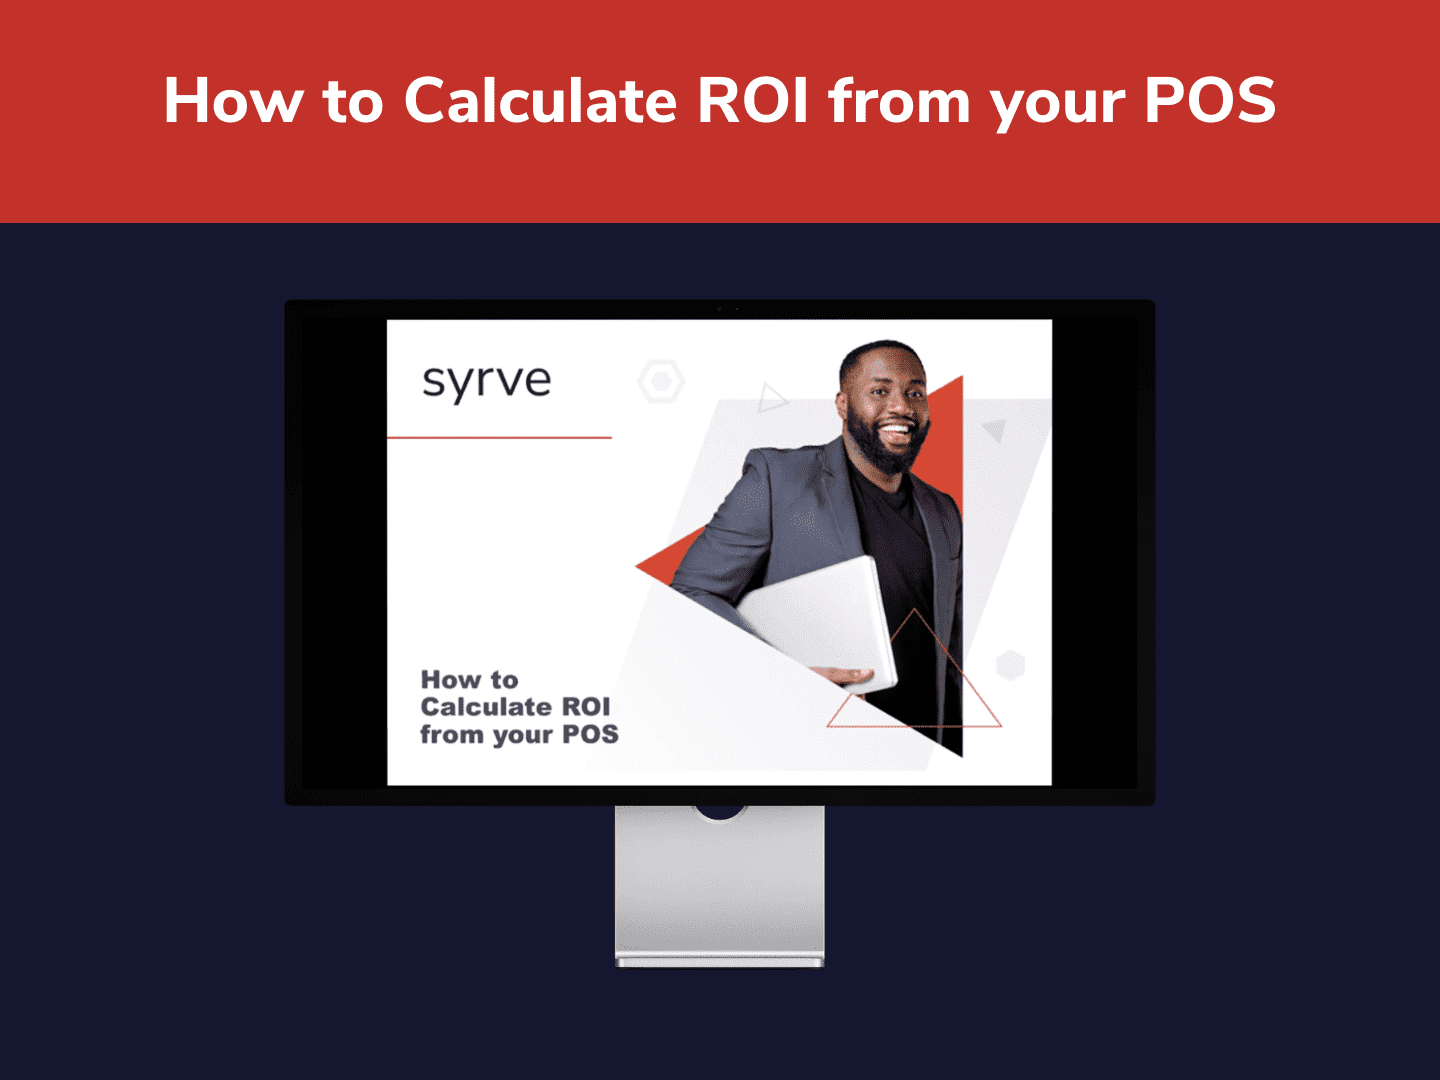 How to Calculate ROI from your POS